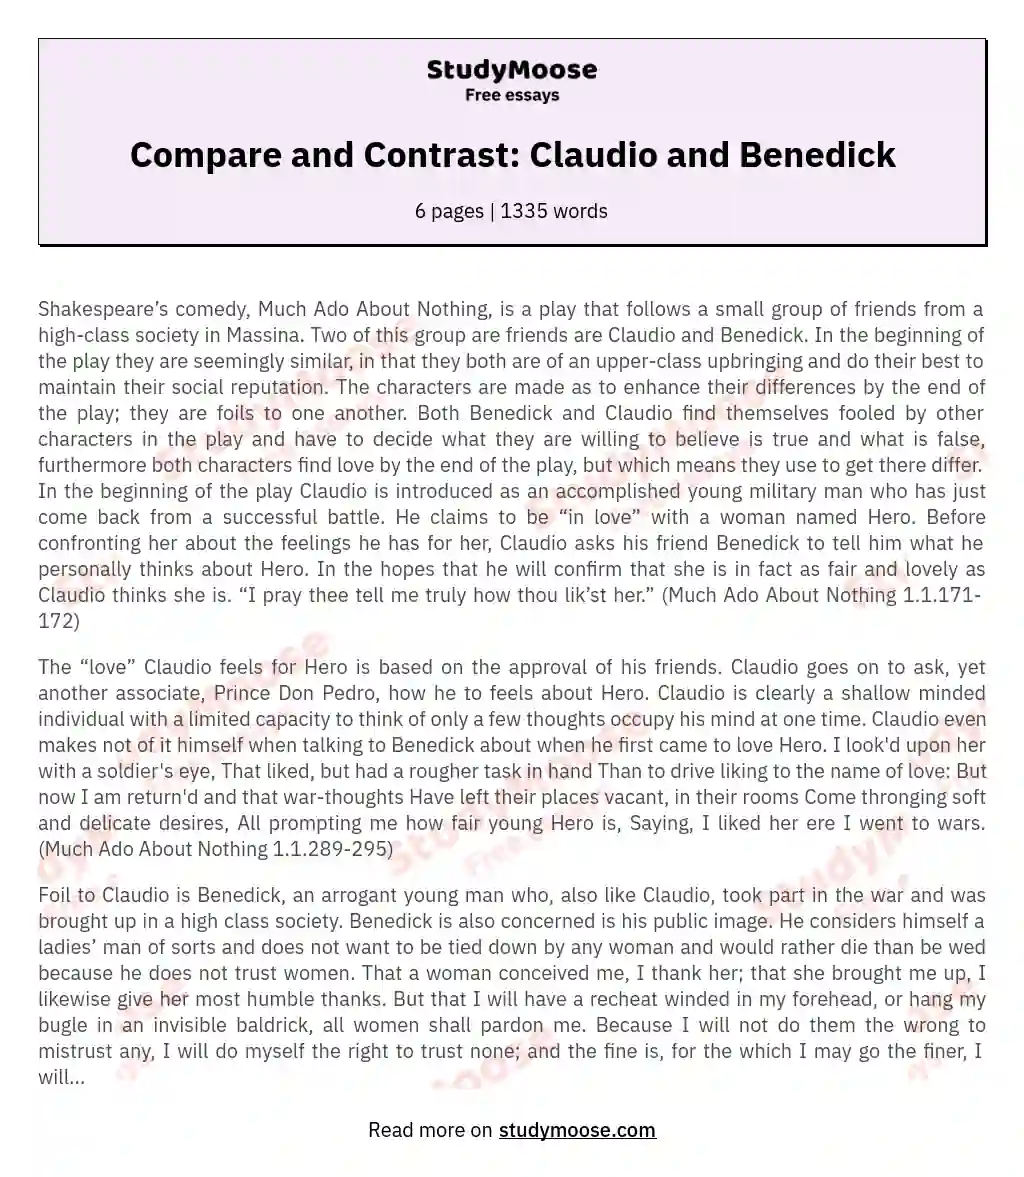 Compare and Contrast: Claudio and Benedick essay